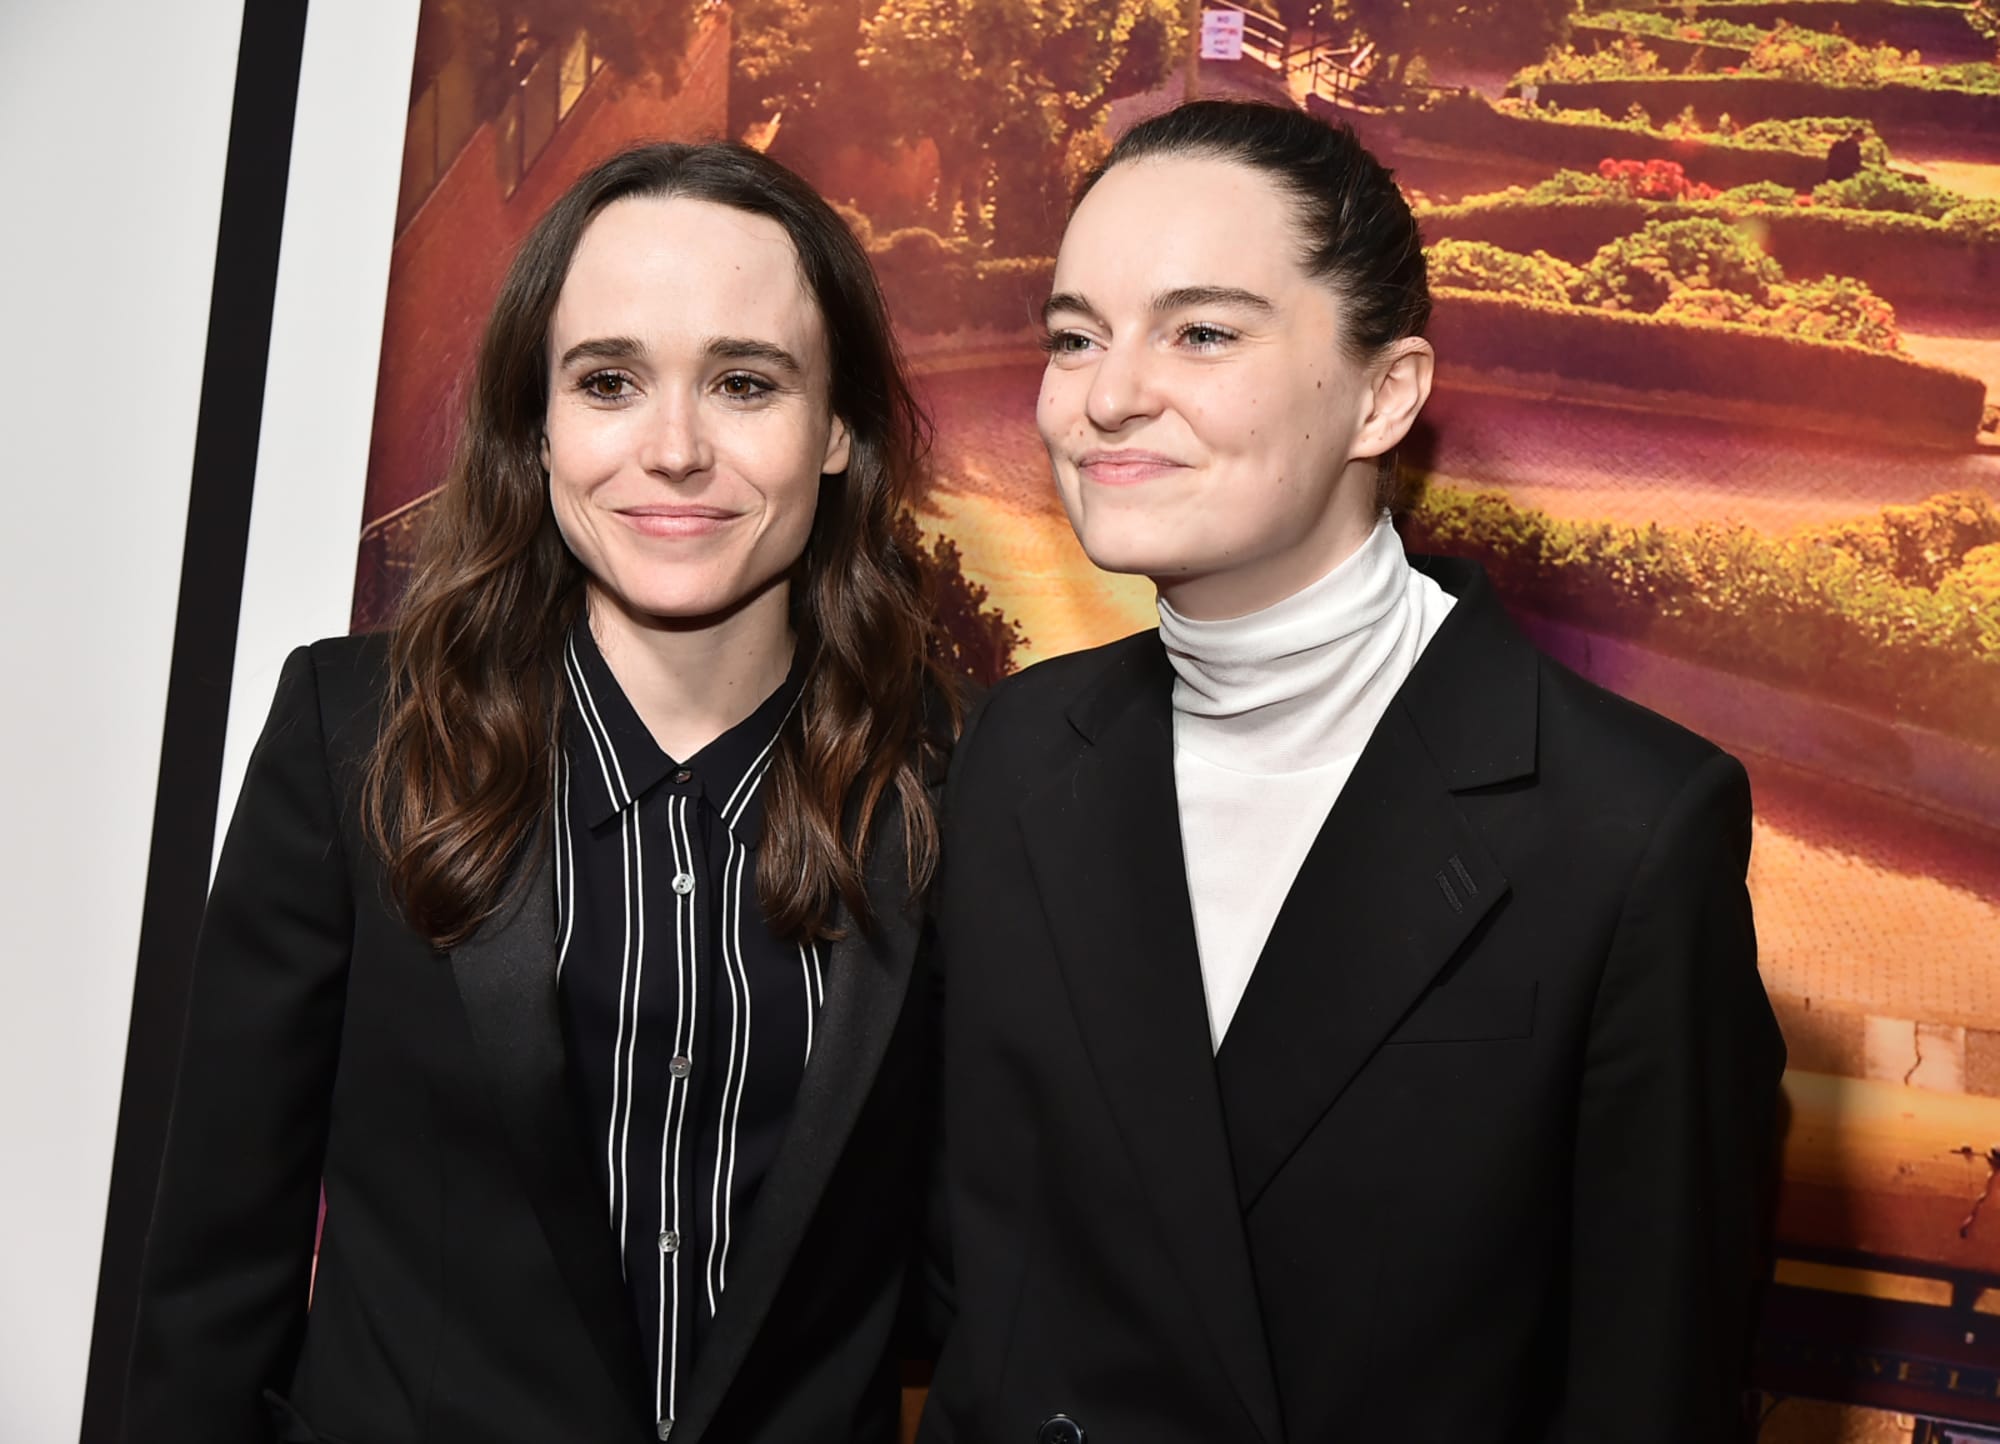 Who is Ellen Page married to? The Umbrella Academy star's dating info